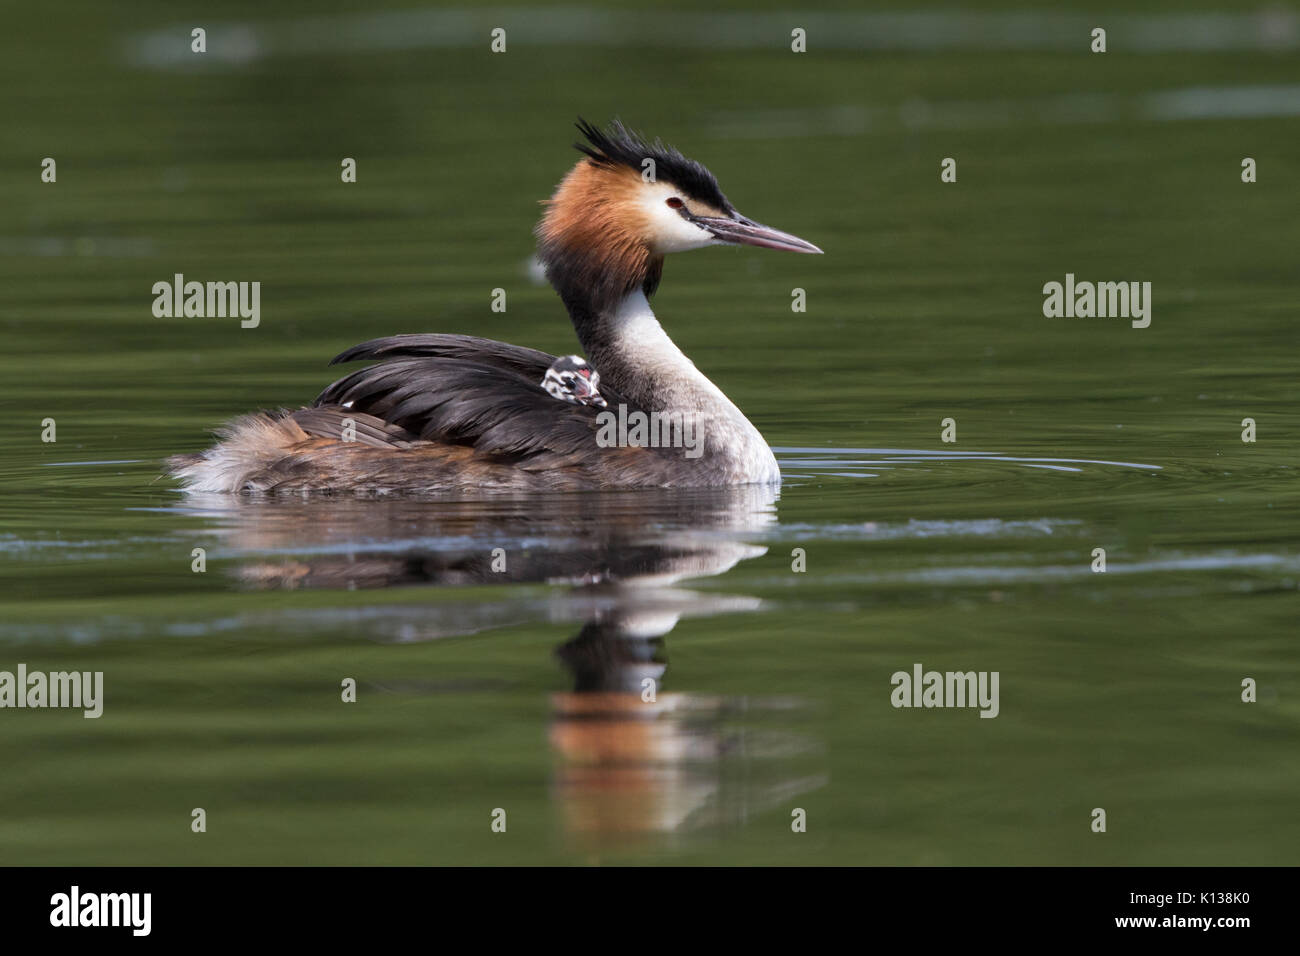 male Great Crested Grebe (Podiceps cristatus) swimming on the water with a chick riding piggyback Stock Photo